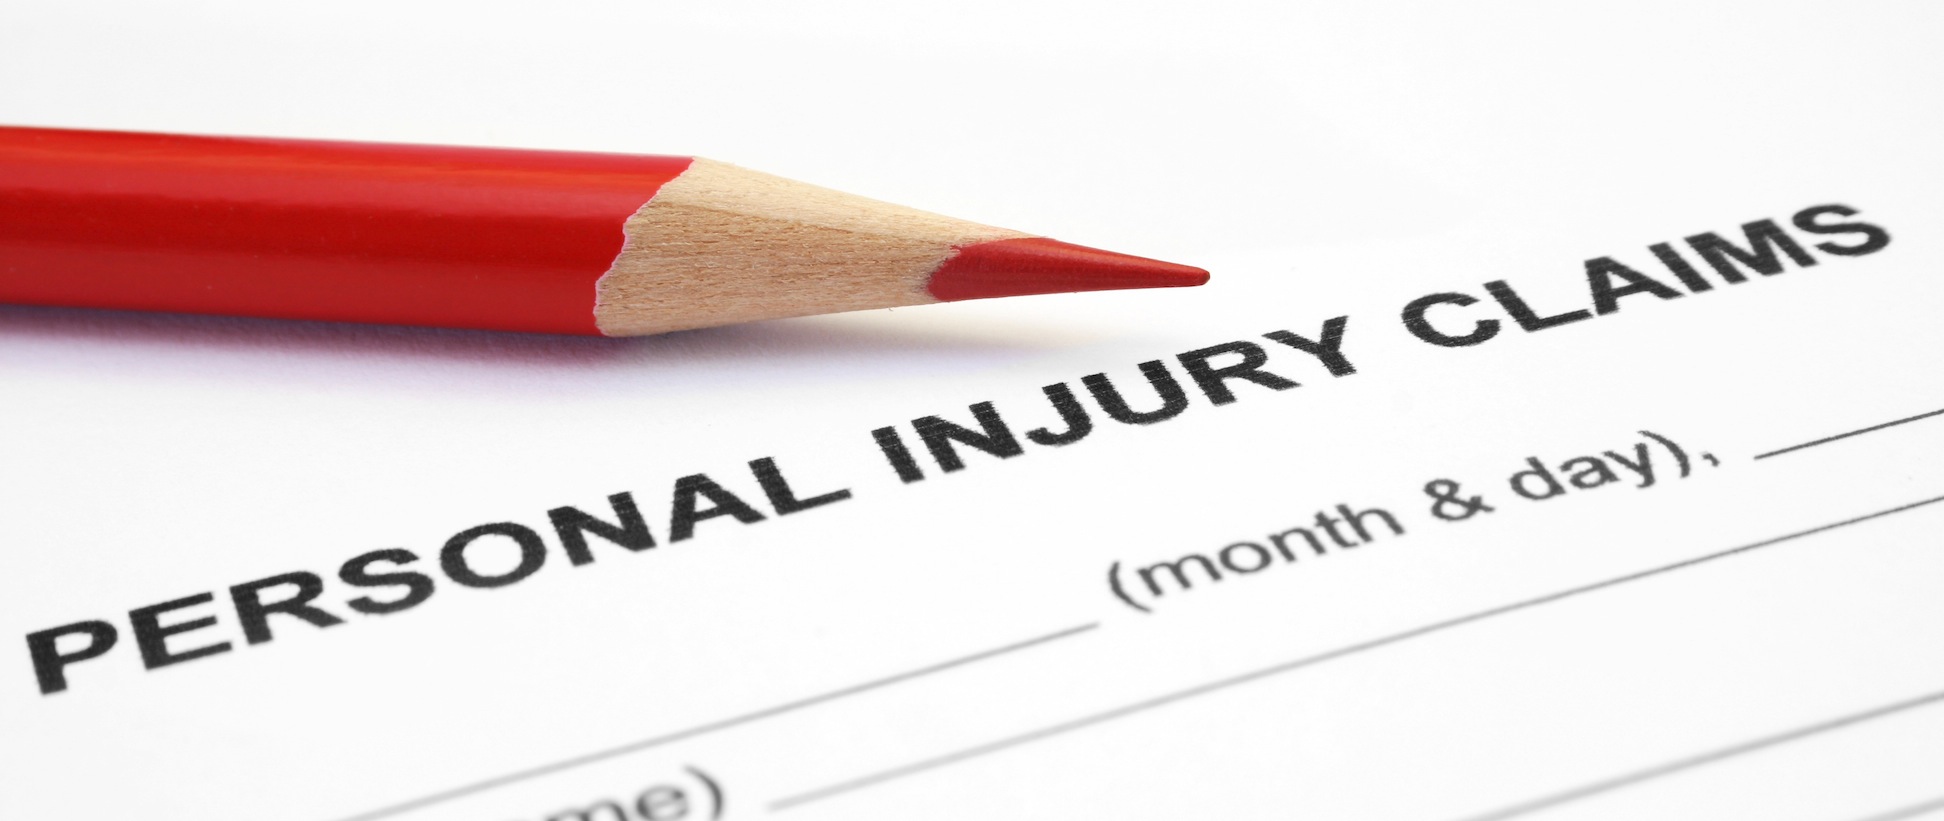 What is personal injury protection?